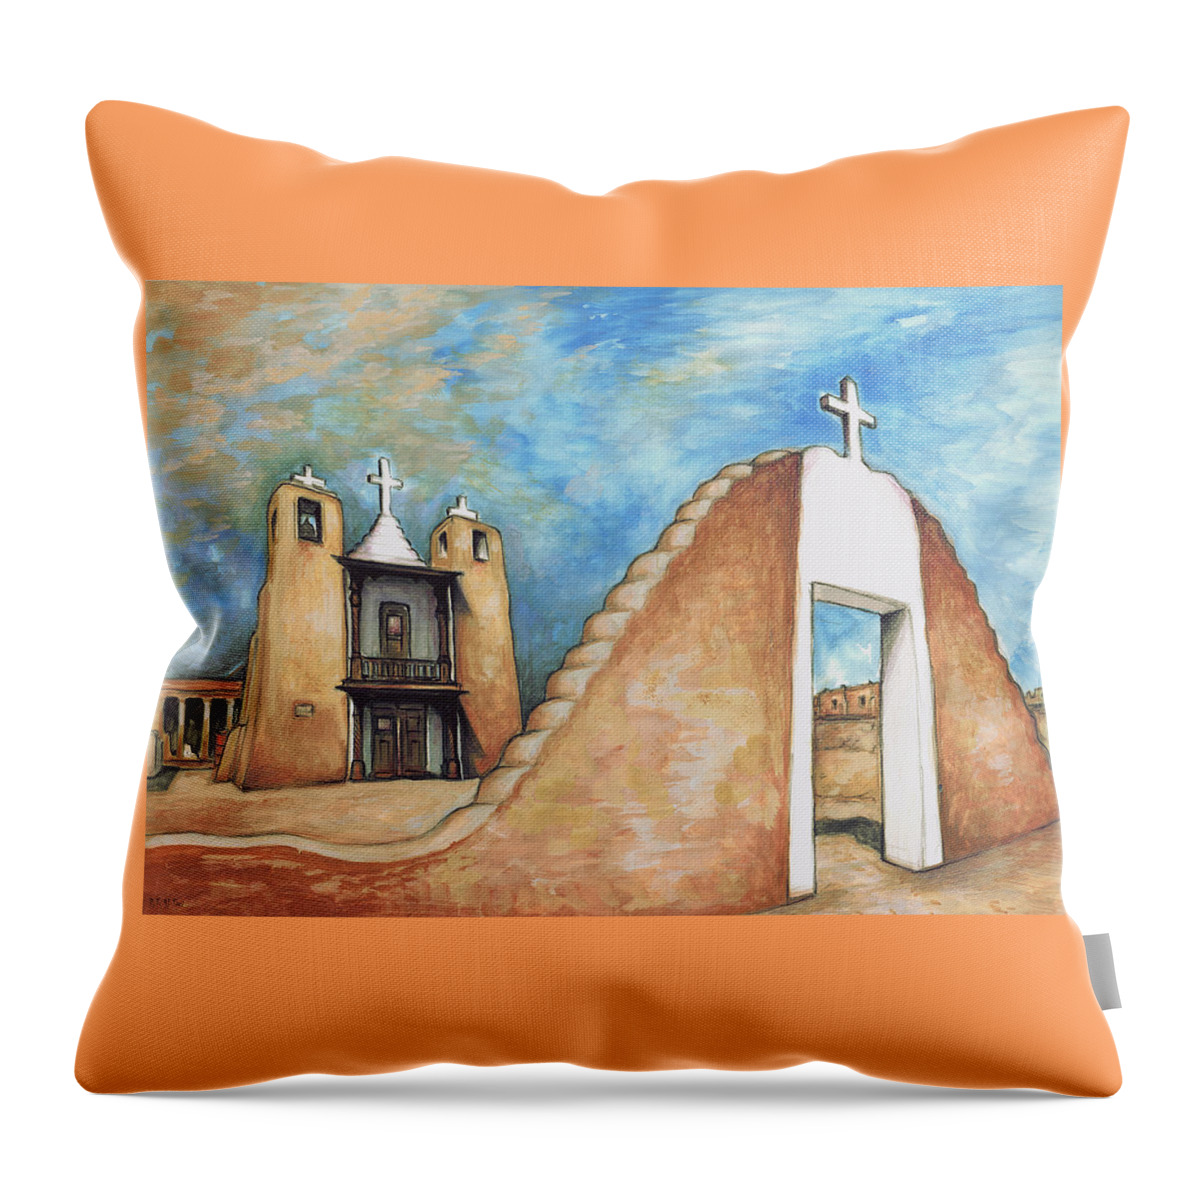 Taos+pueblo Throw Pillow featuring the painting Taos Pueblo New Mexico - Watercolor Art Painting by Peter Potter